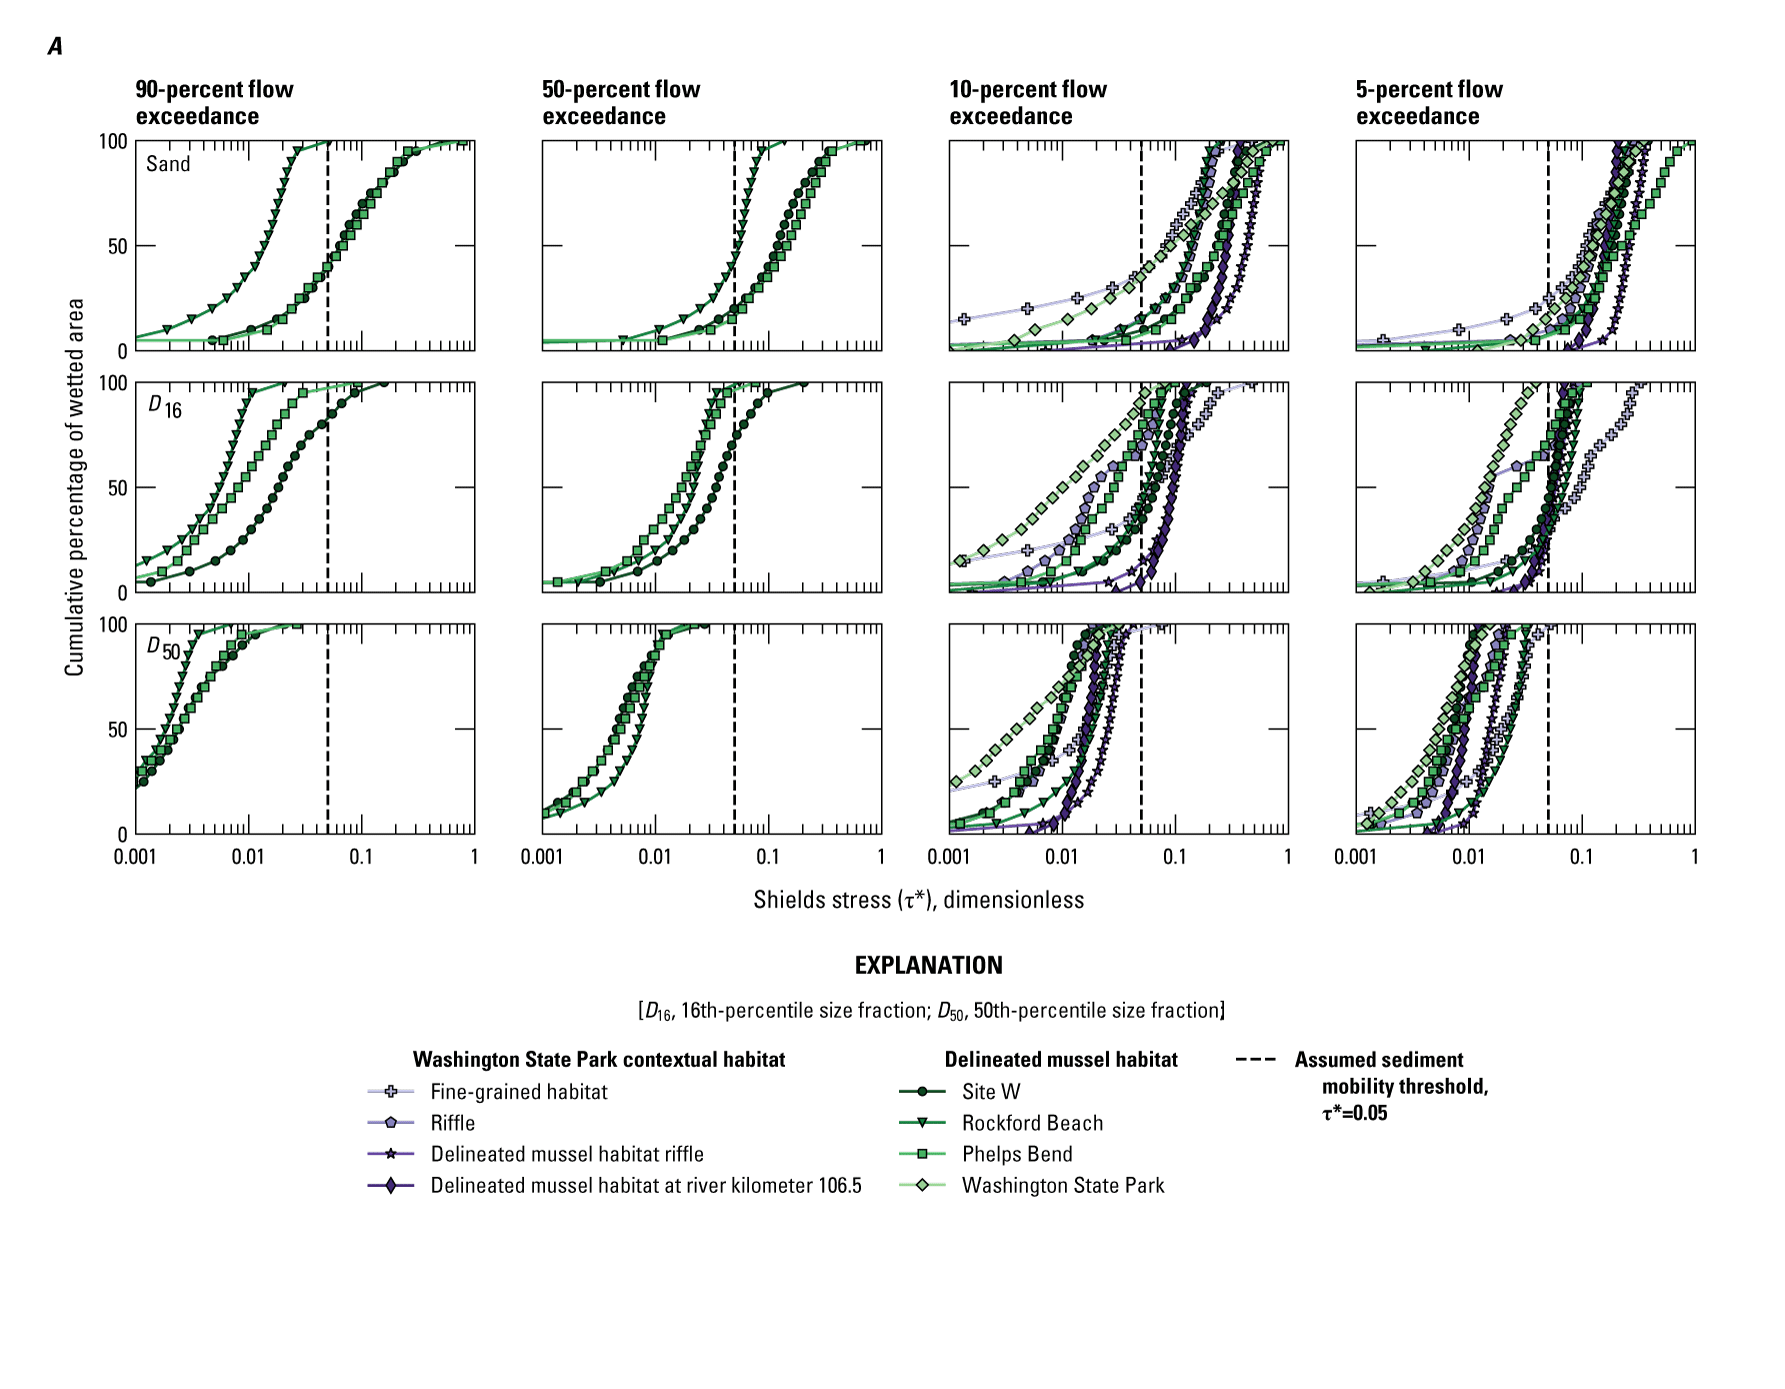 Variable percentages of mobile wetted area in the MHs and contextual habitats for
                           each grain size class are shown.